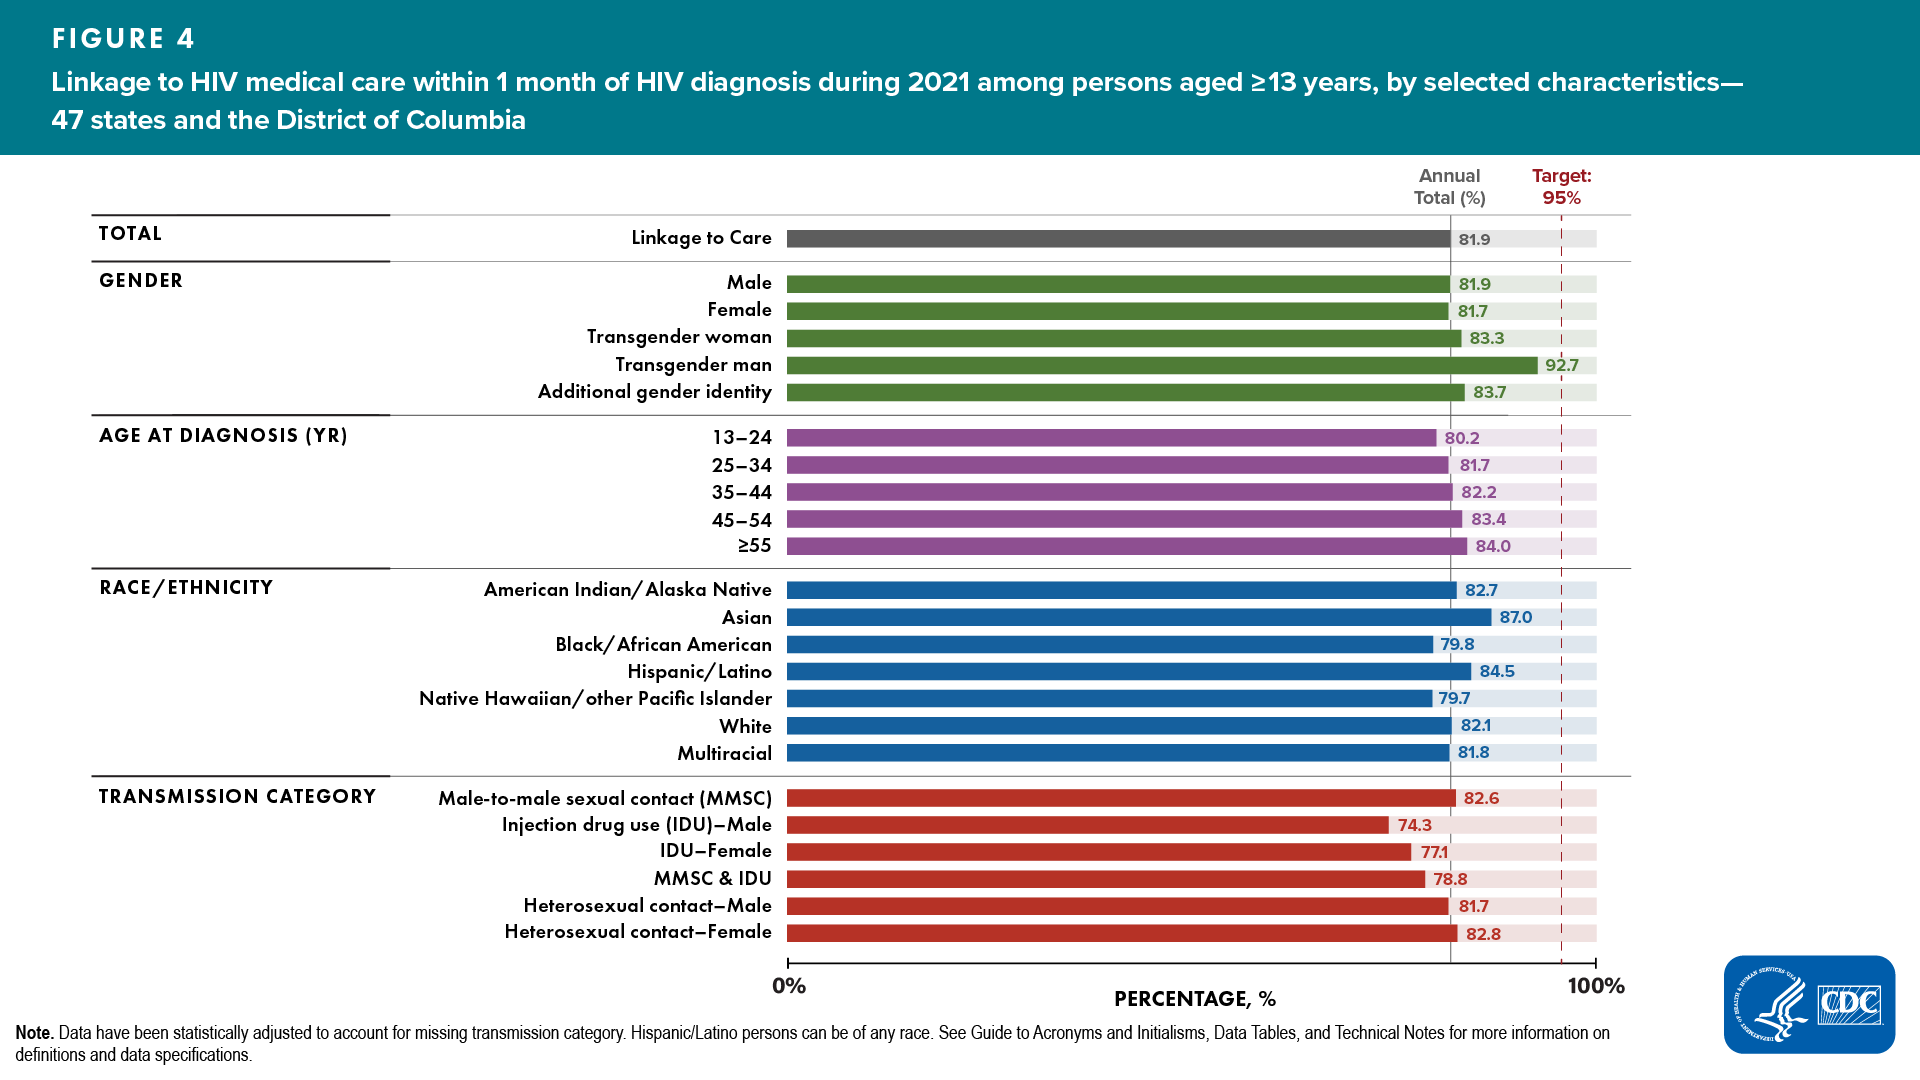 Figure 4. Linkage to HIV medical care within 1 month of HIV diagnosis during 2021 among persons aged ≥13 years, by selected characteristics — 47 states and the District of Columbia